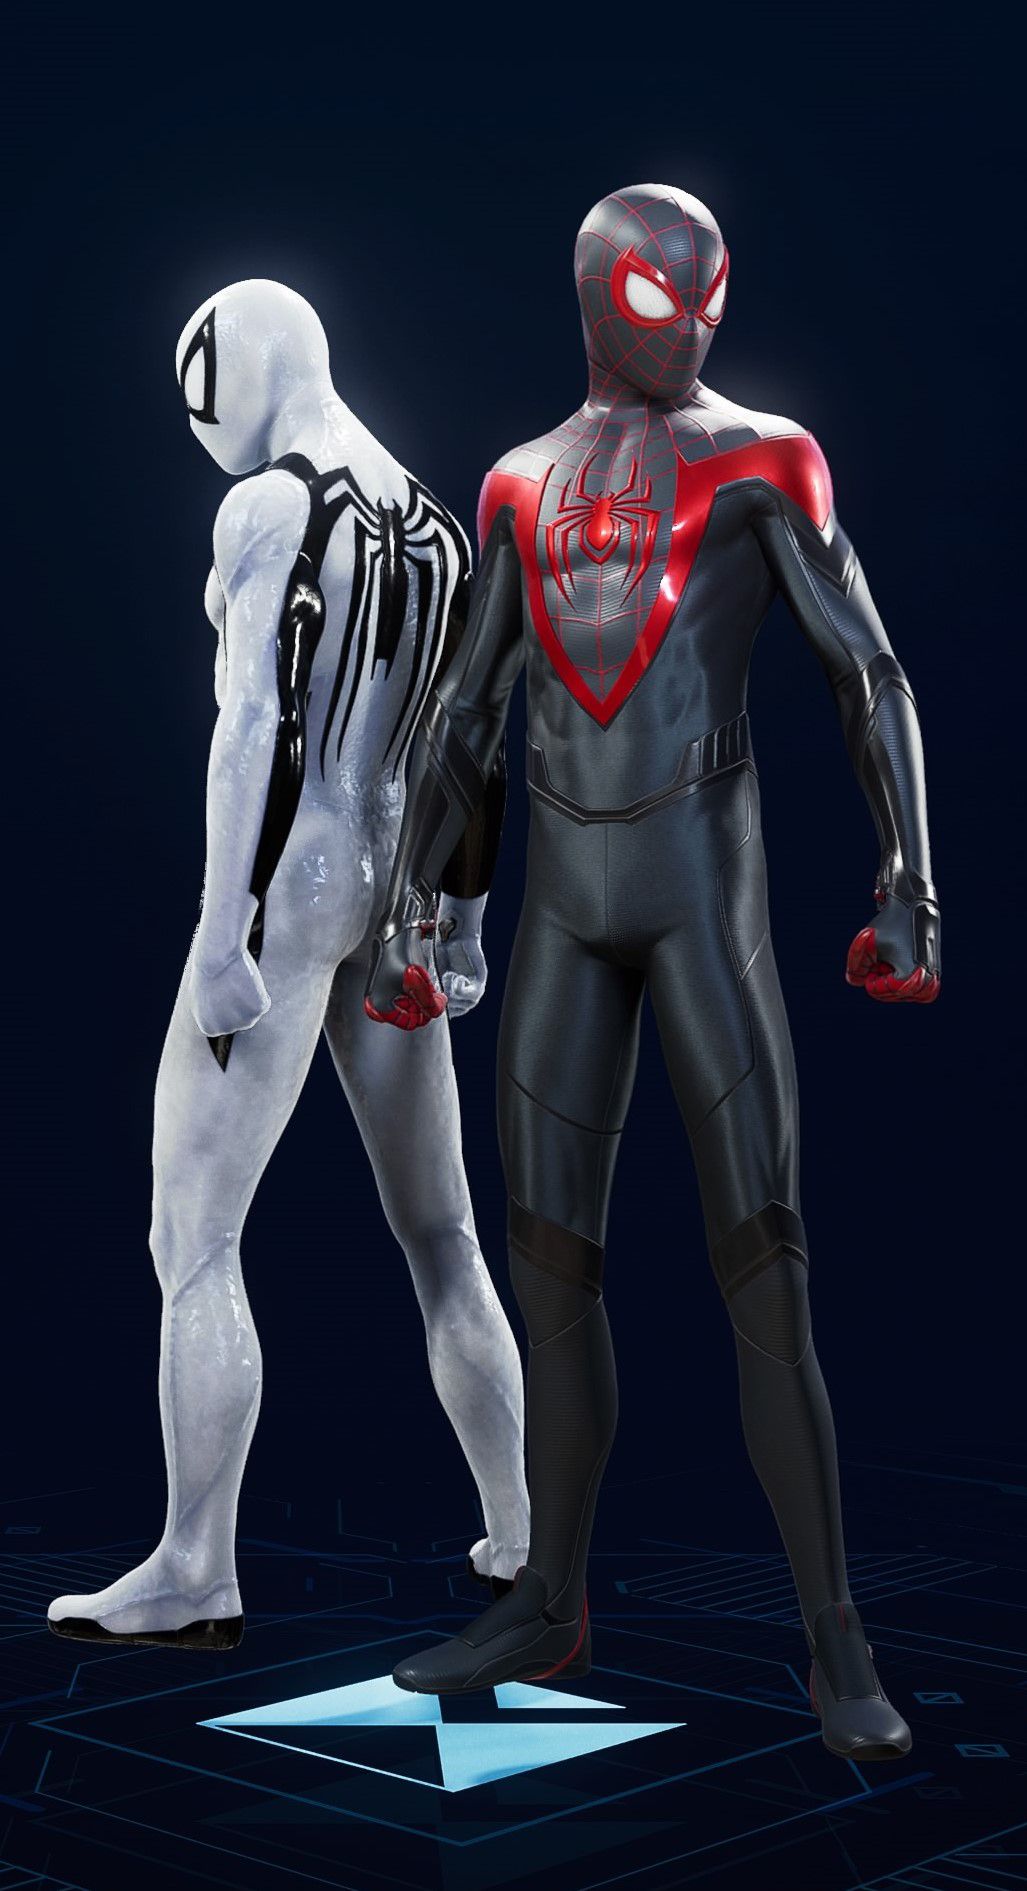 Miles Morales stands in his Classic Suit in the suit selection screen of Spider-Man 2.